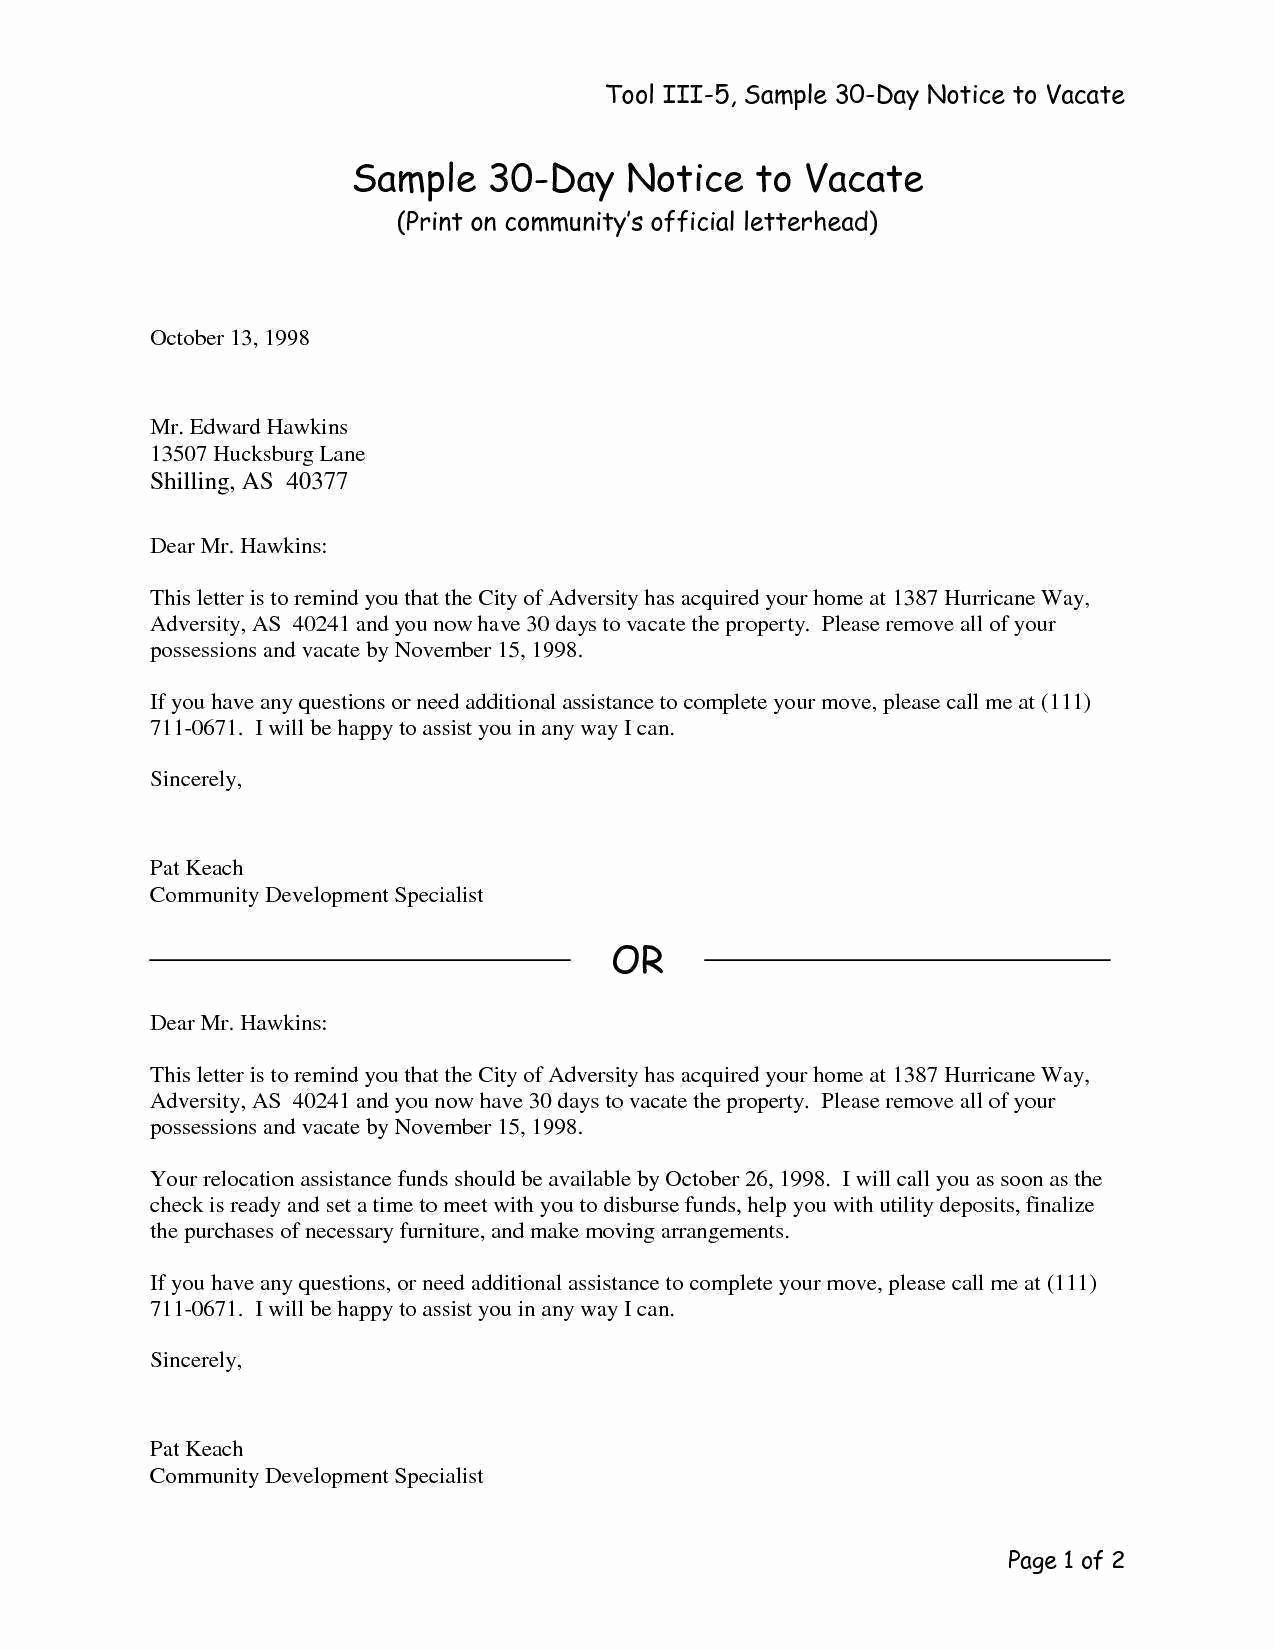 Notice Letter to Landlord Elegant 30 Day Notice Letter to Landlord Template Samples